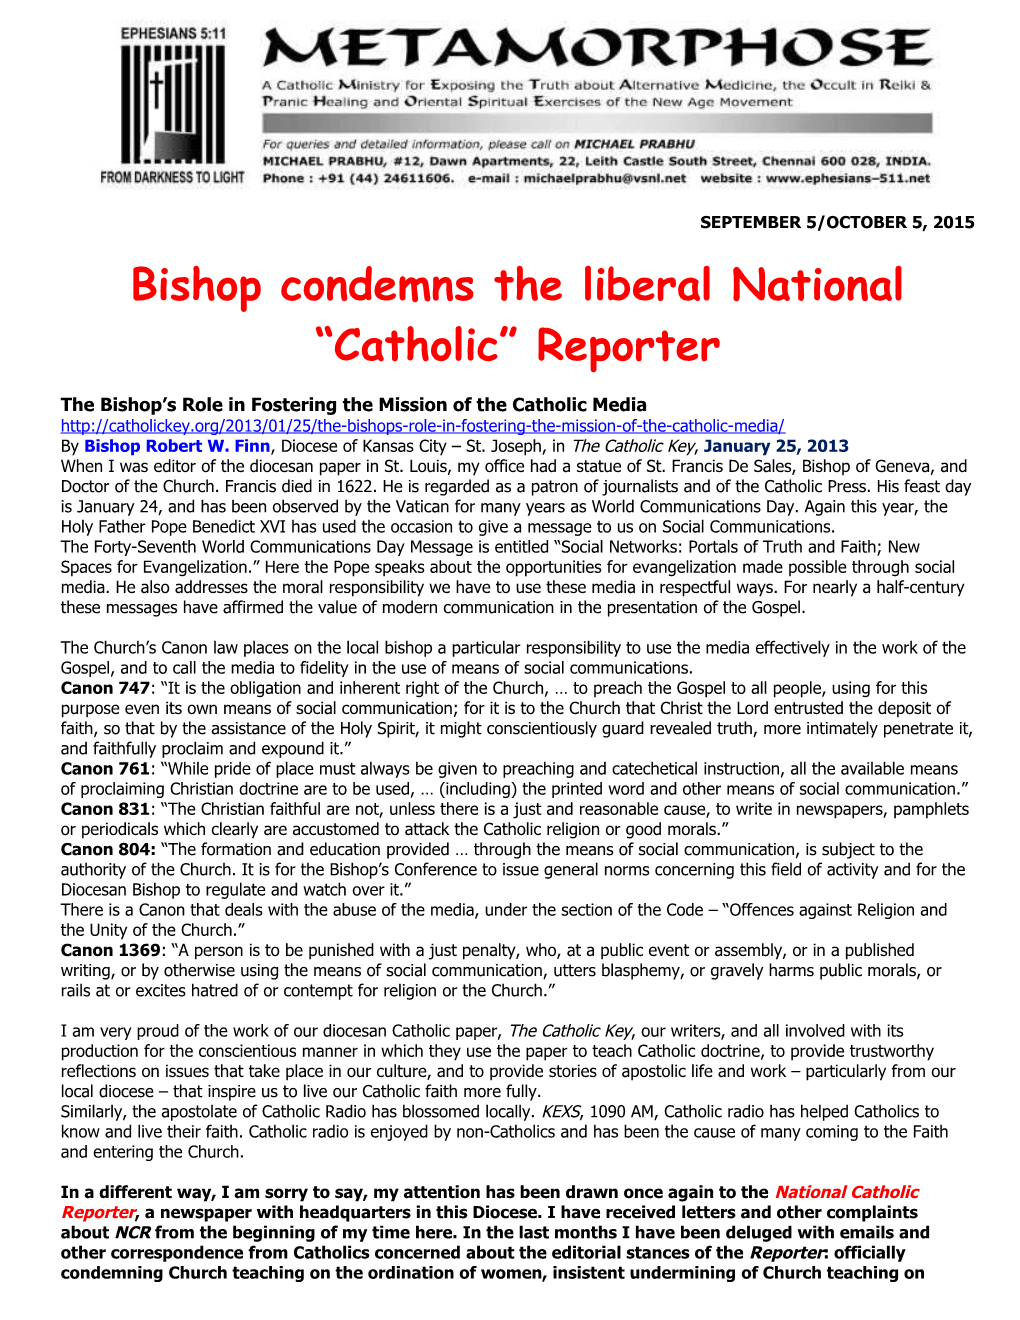 Bishop Condemns the Liberal National Catholic Reporter